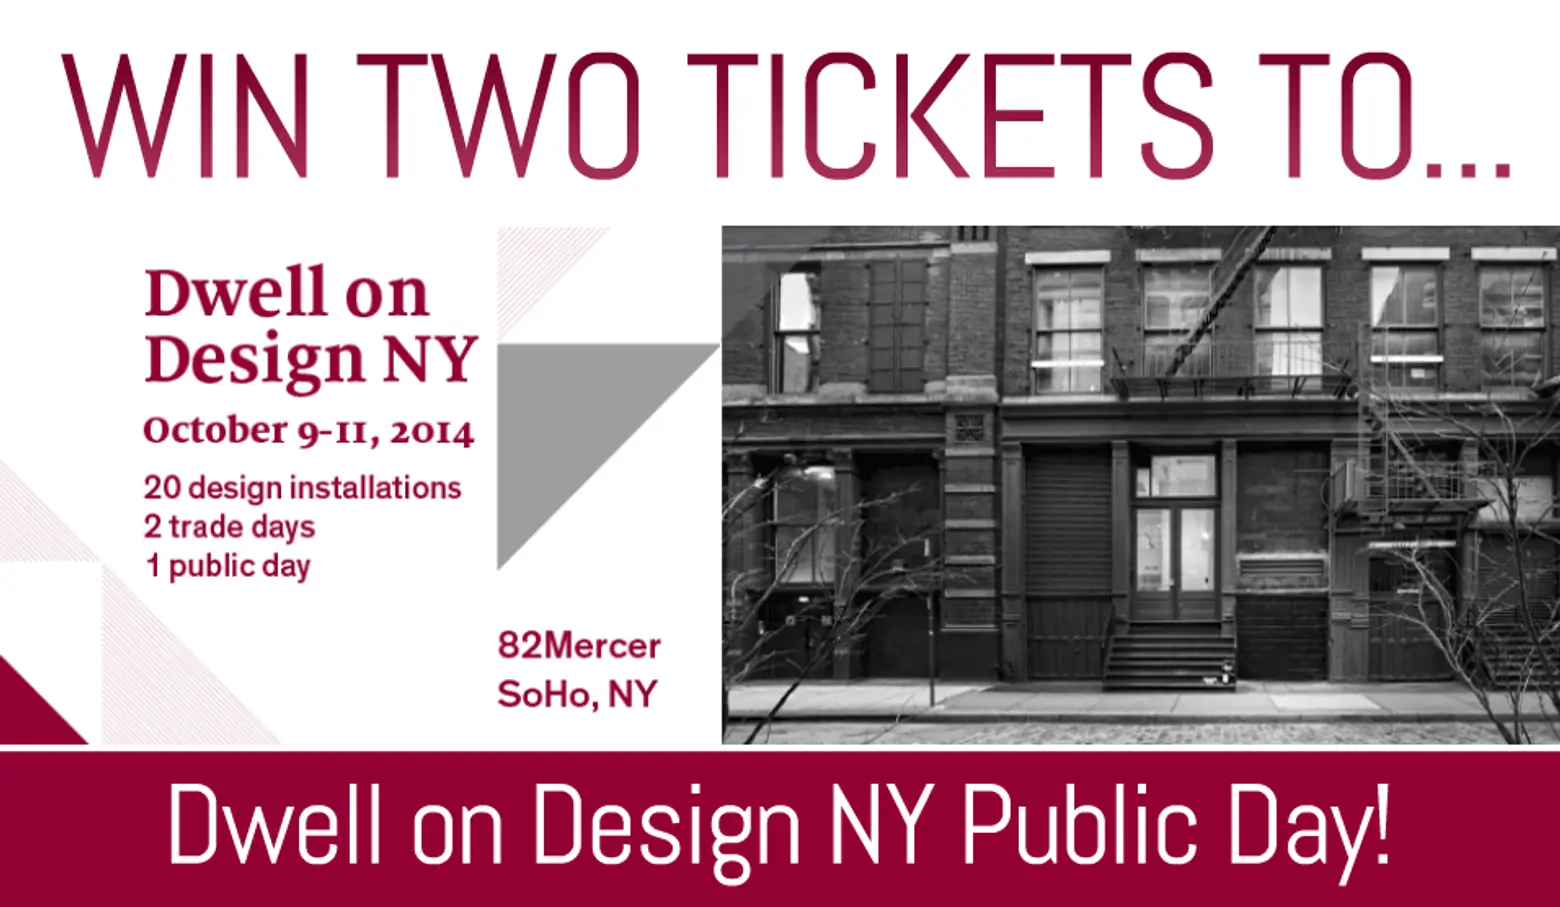 LAST CHANCE: Win Two Tickets to Dwell on Design New York!